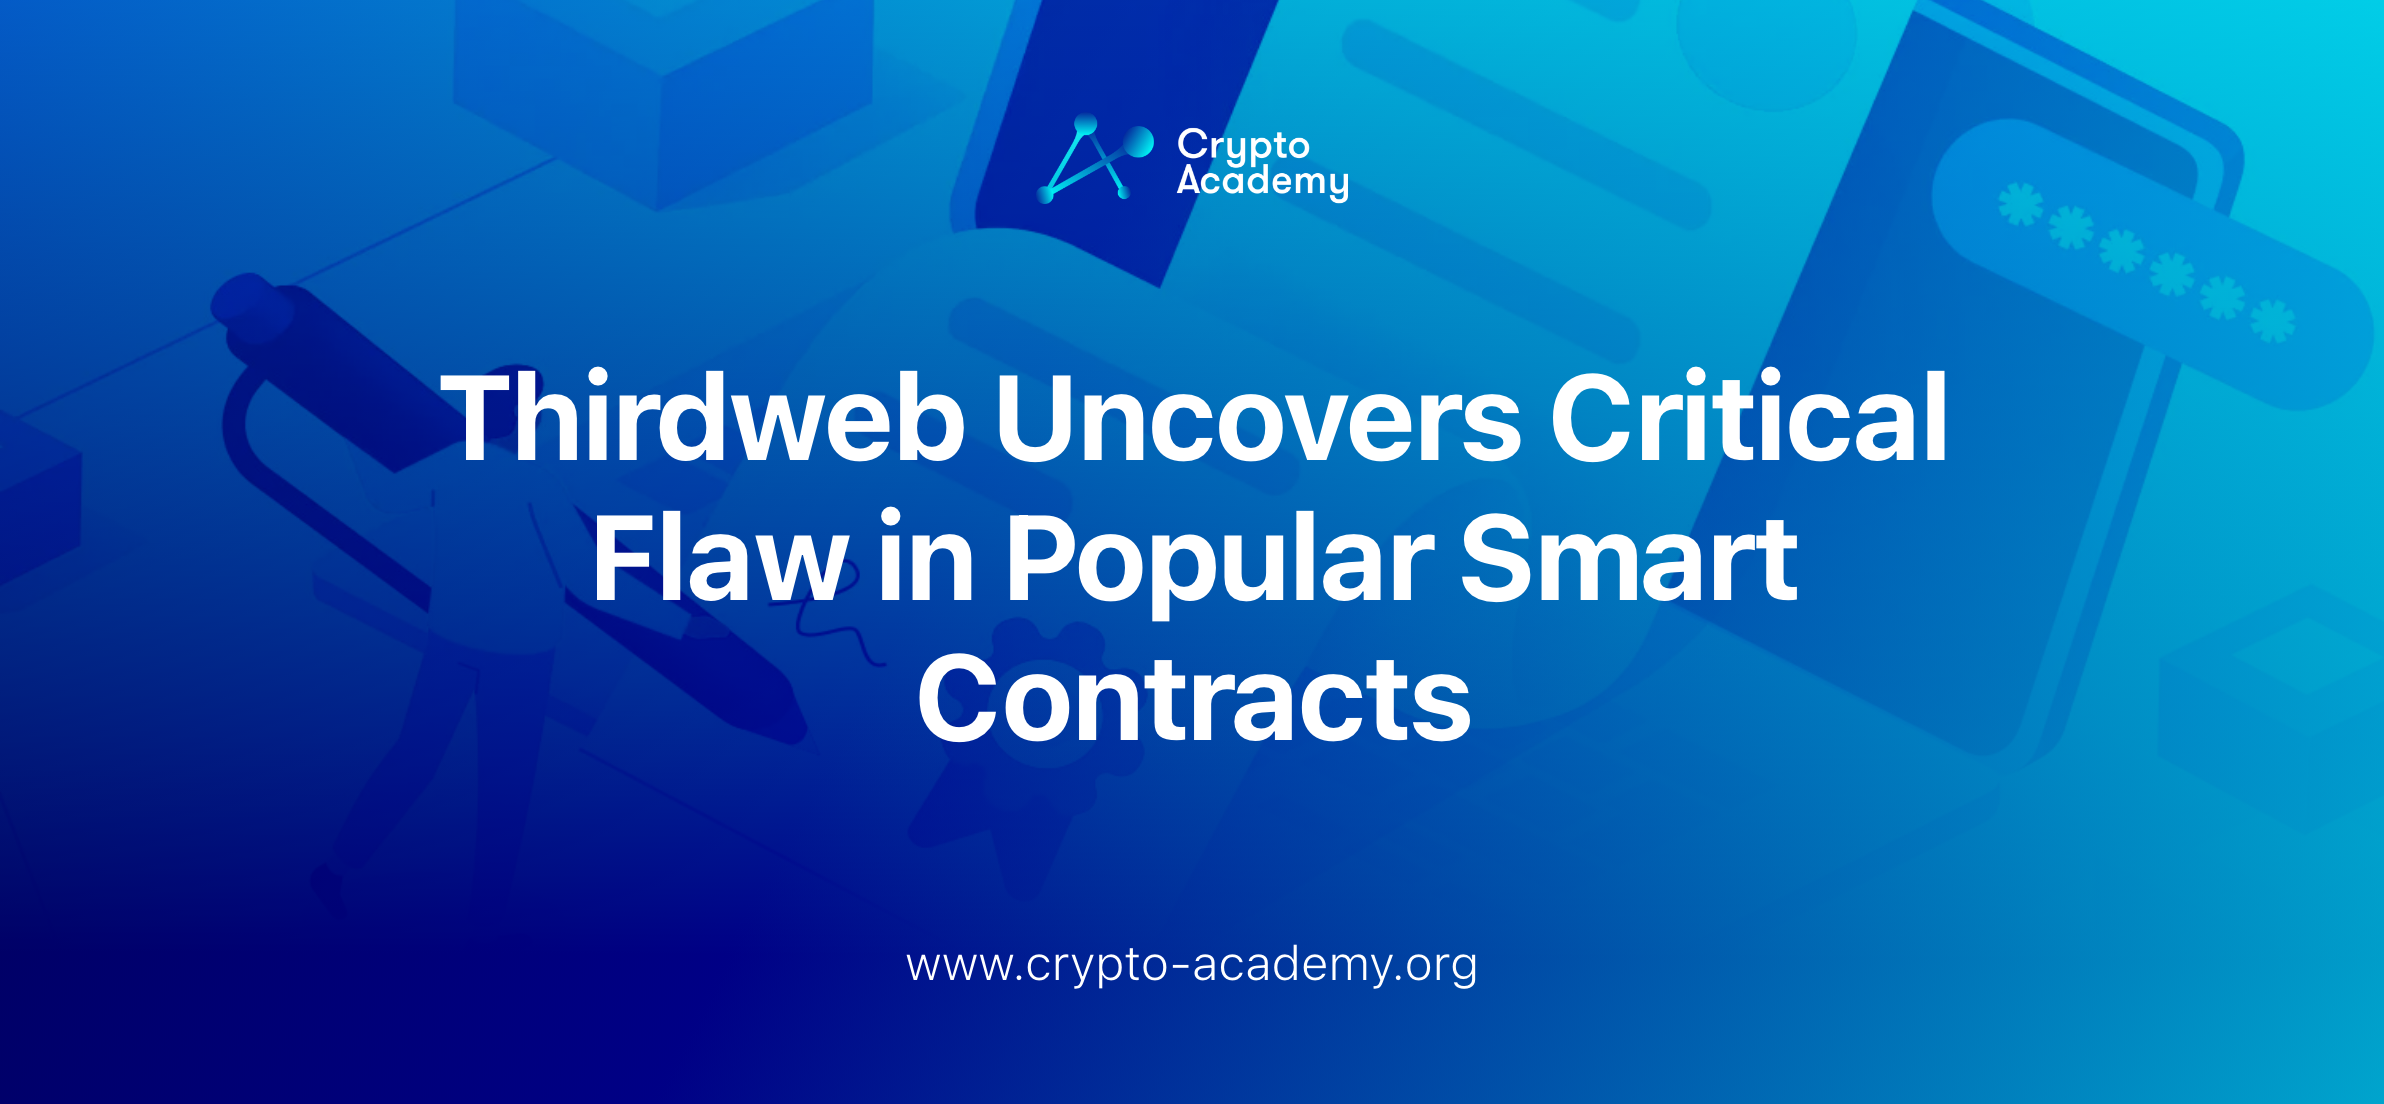 Thirdweb Uncovers Critical Flaw in Popular Smart Contracts